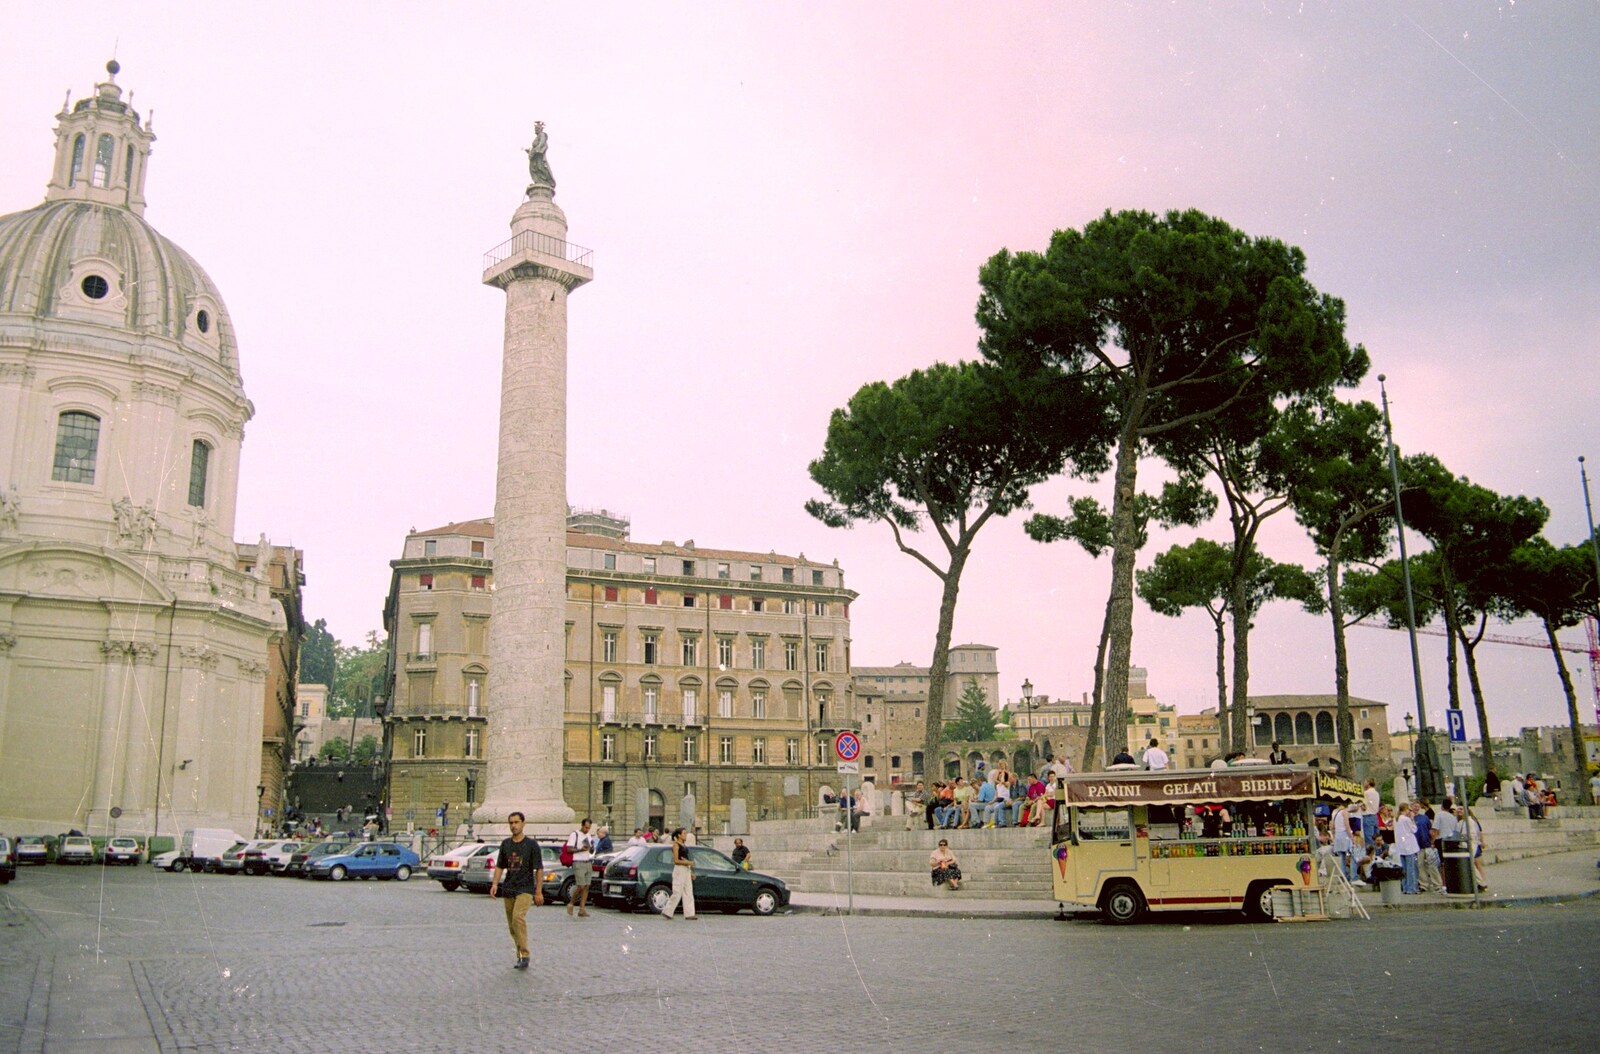 Trajan's Column from A Working Trip to Rome, Italy - 10th September 1999